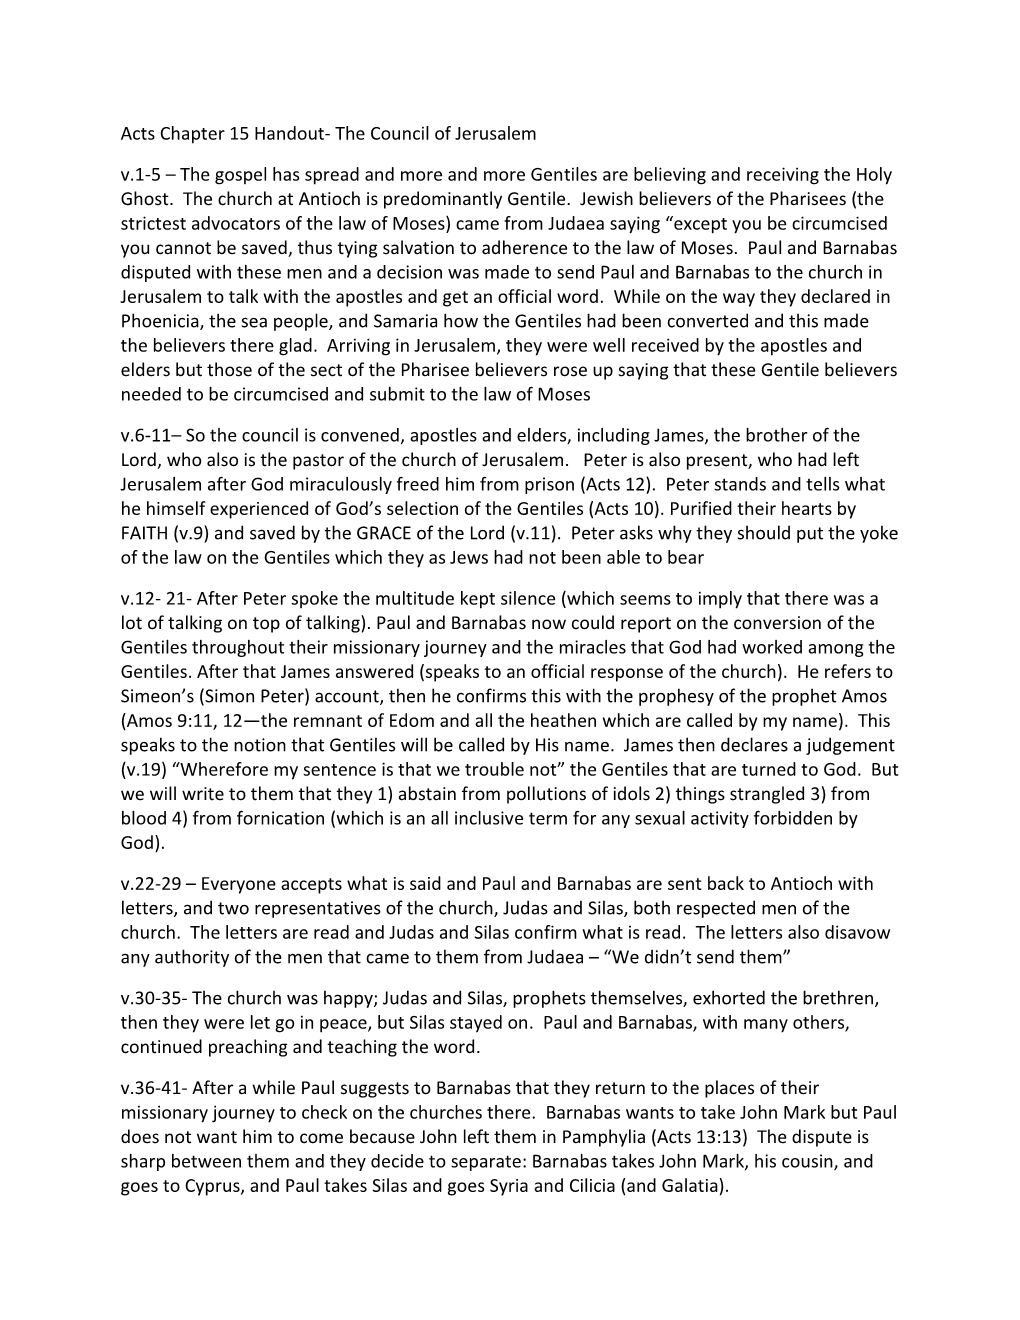 Acts Chapter 15 Handout- the Council of Jerusalem V.1-5 – the Gospel Has Spread and More and More Gentiles Are Believing and Receiving the Holy Ghost